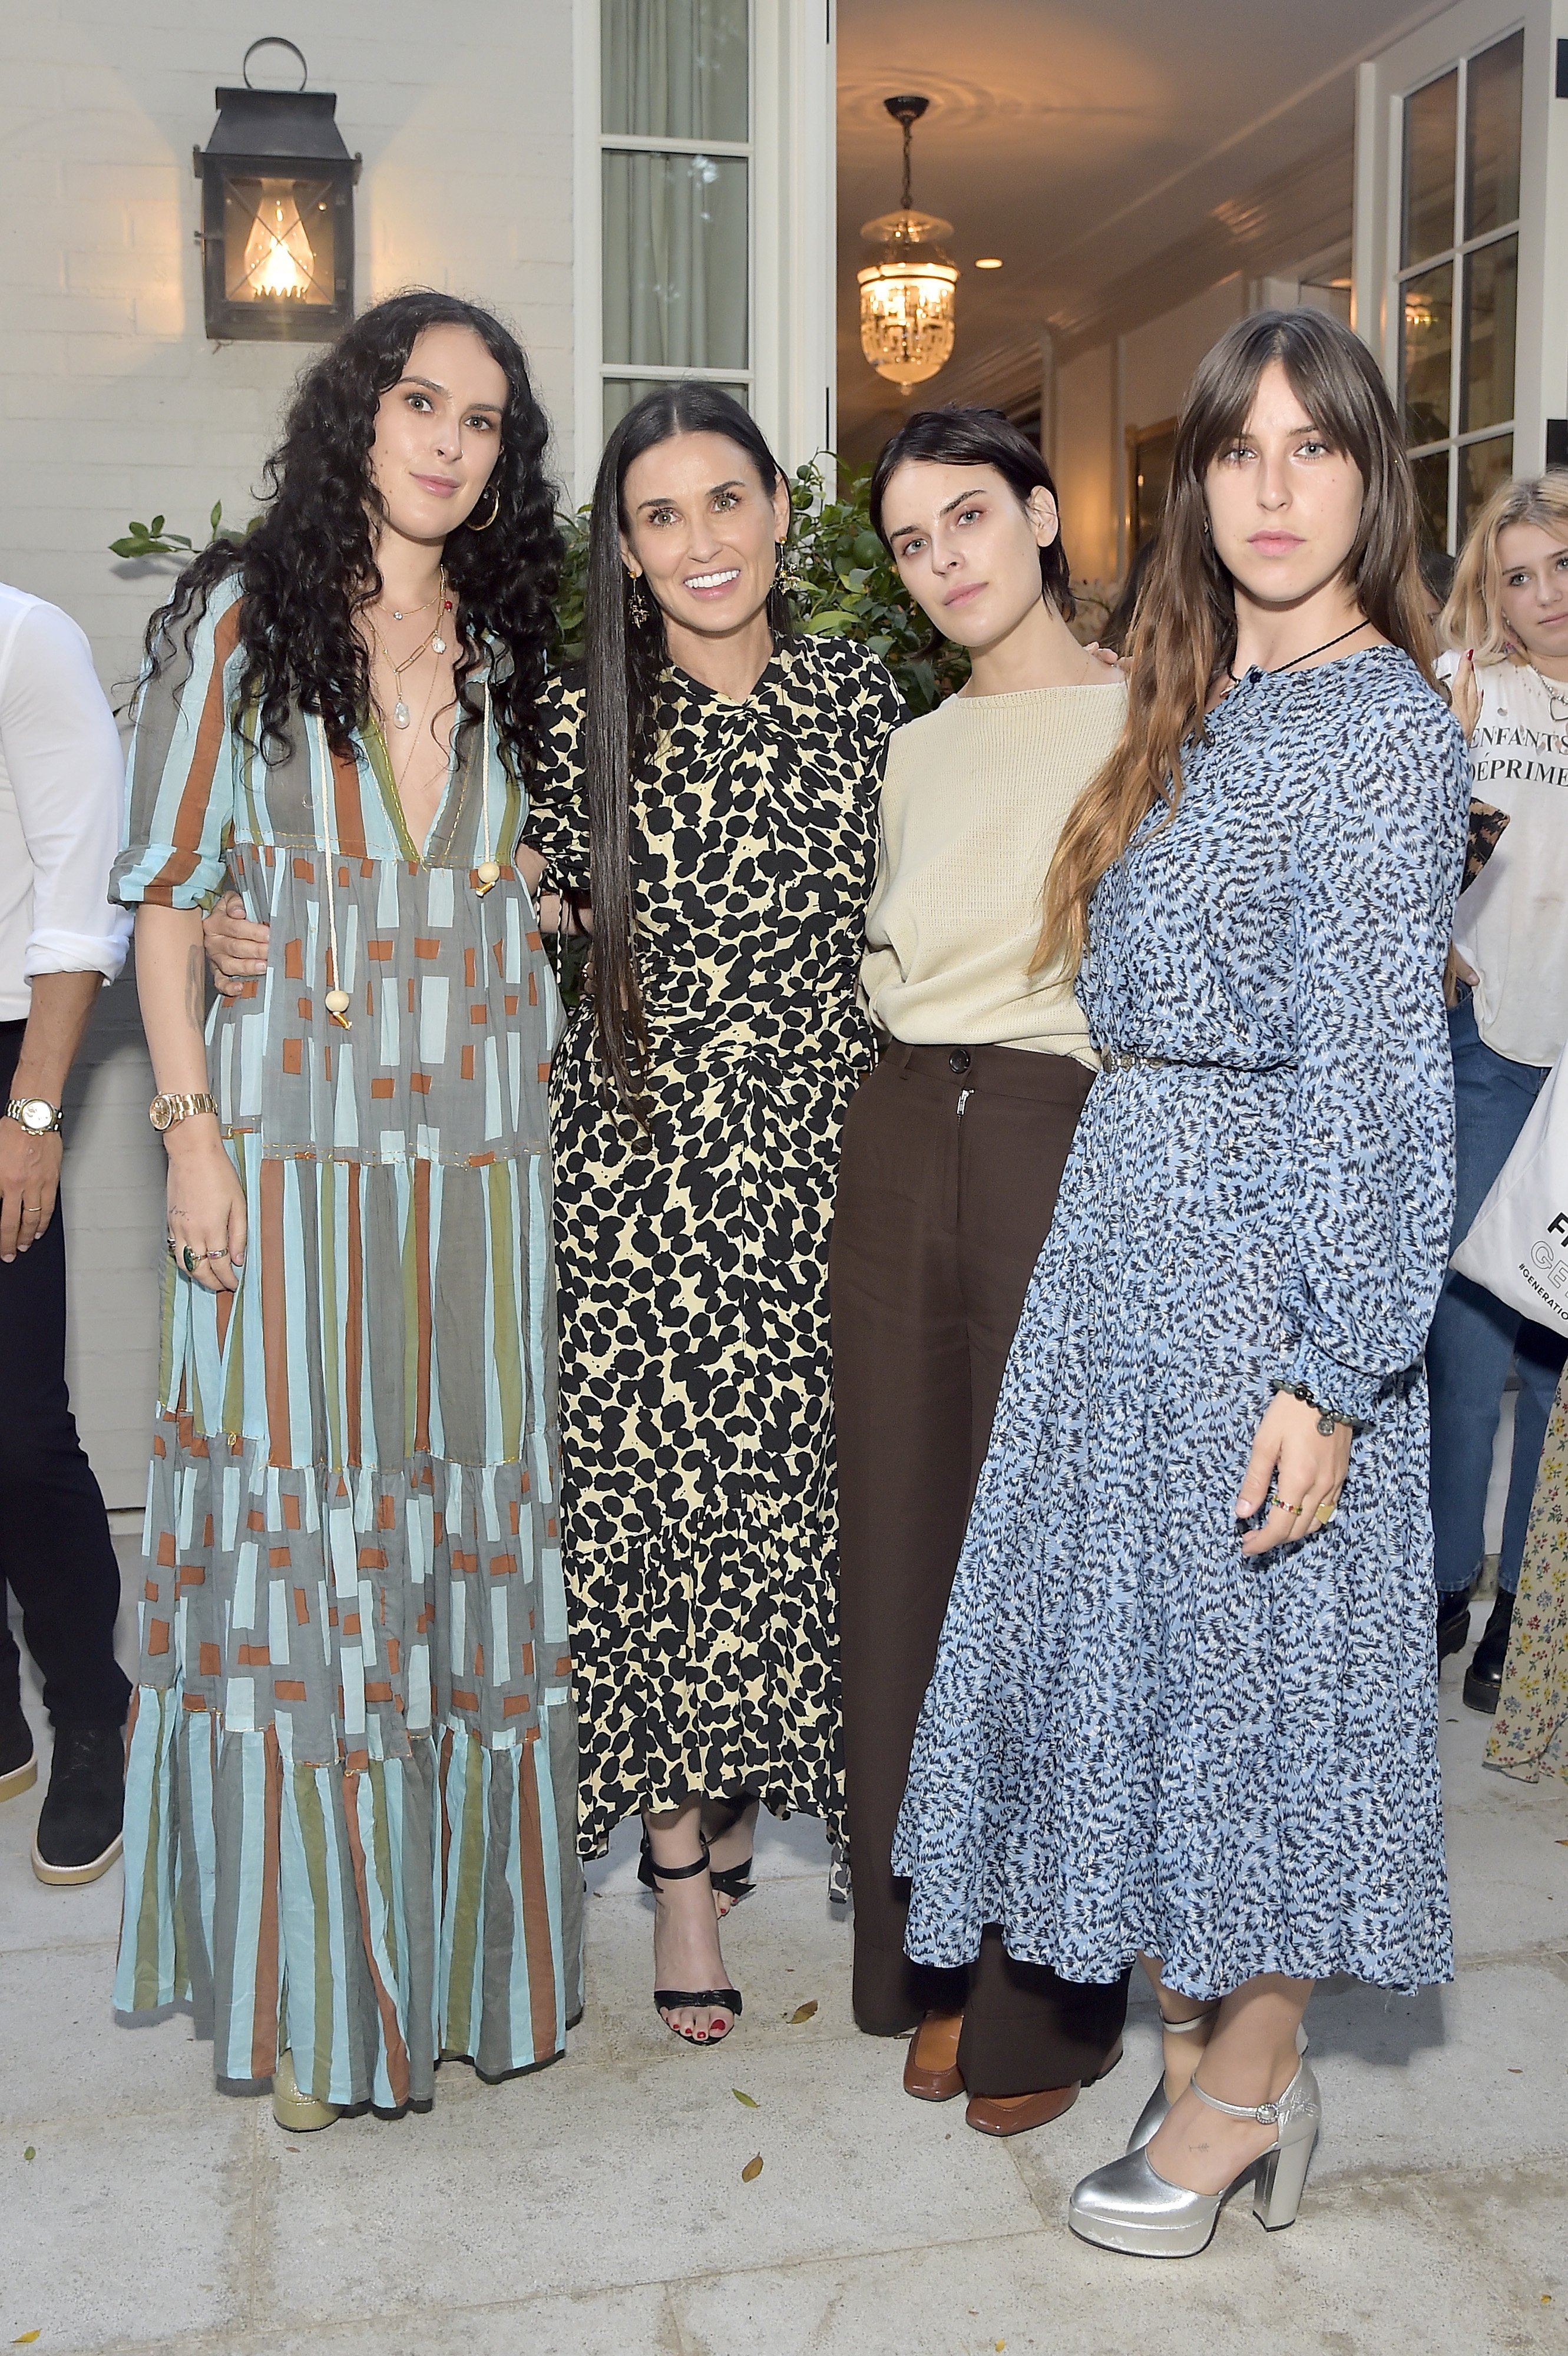 Rumer Willis, Demi Moore, Tallulah Willis and Scout Willis attend Demi Moore's 'Inside Out' Book Party on September 23, 2019 in Los Angeles, California. | Source: Getty Images